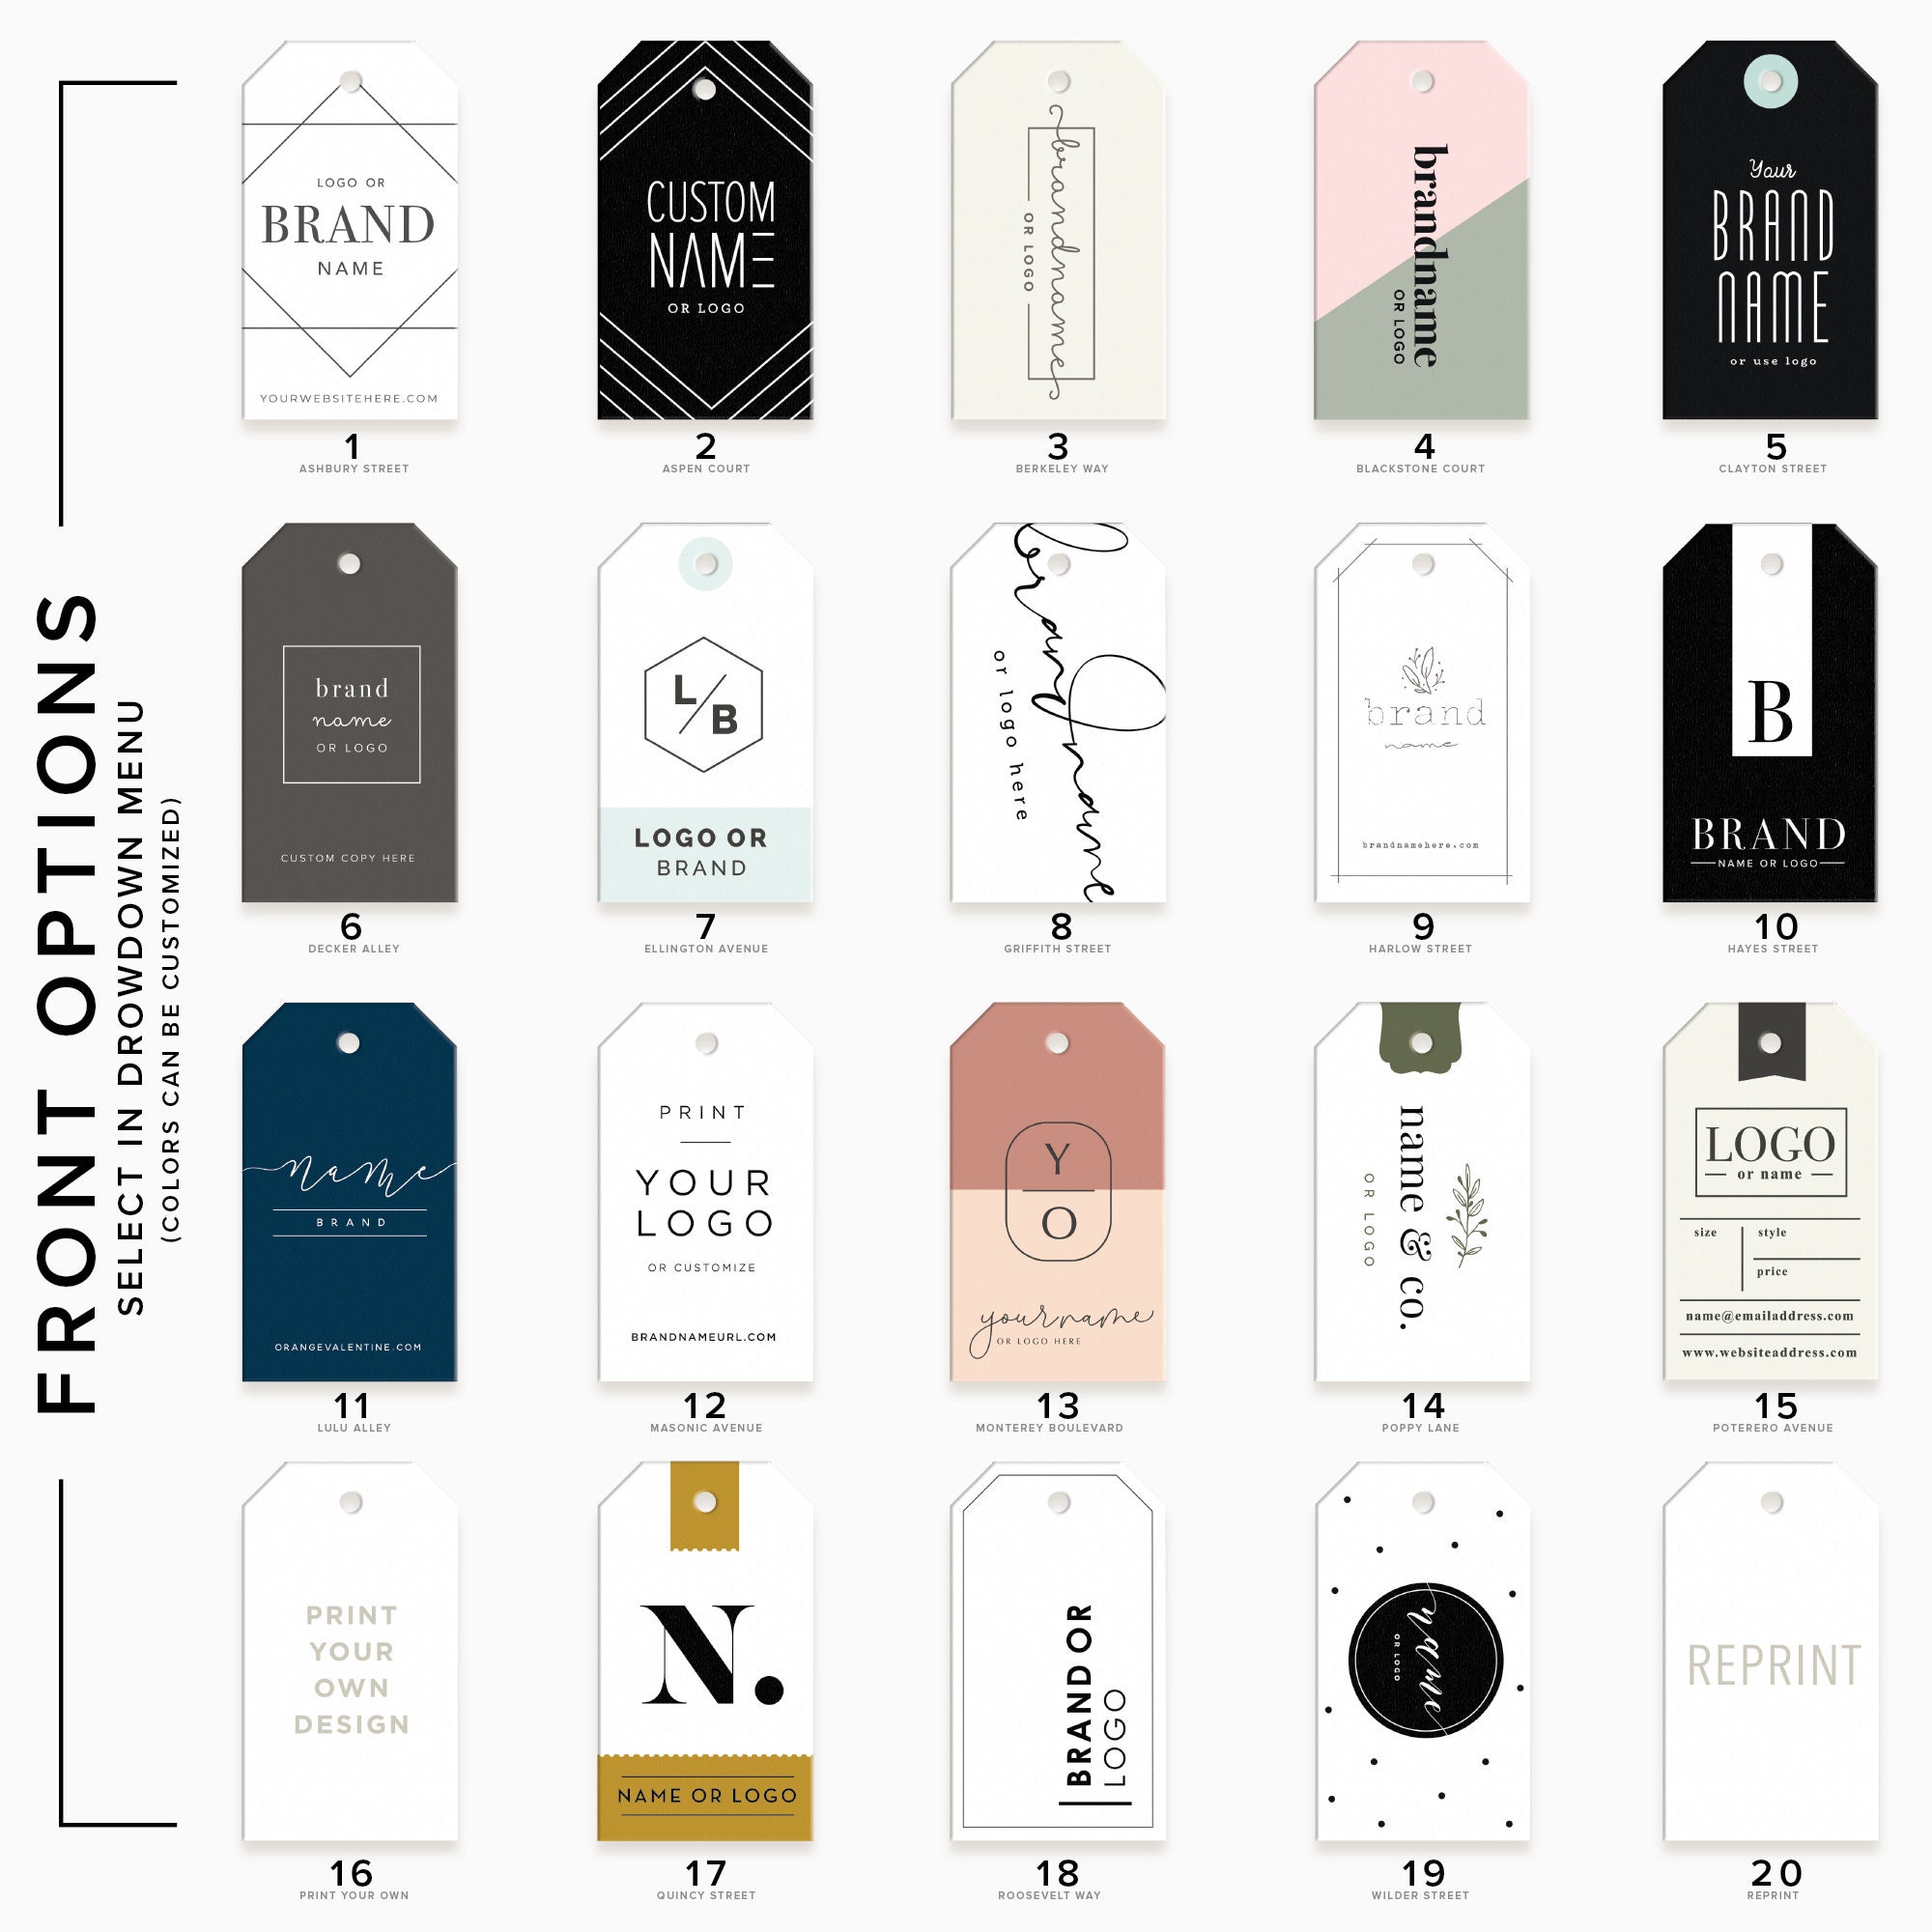 Garment Tags – Garment Price Tags and Clothing Tags